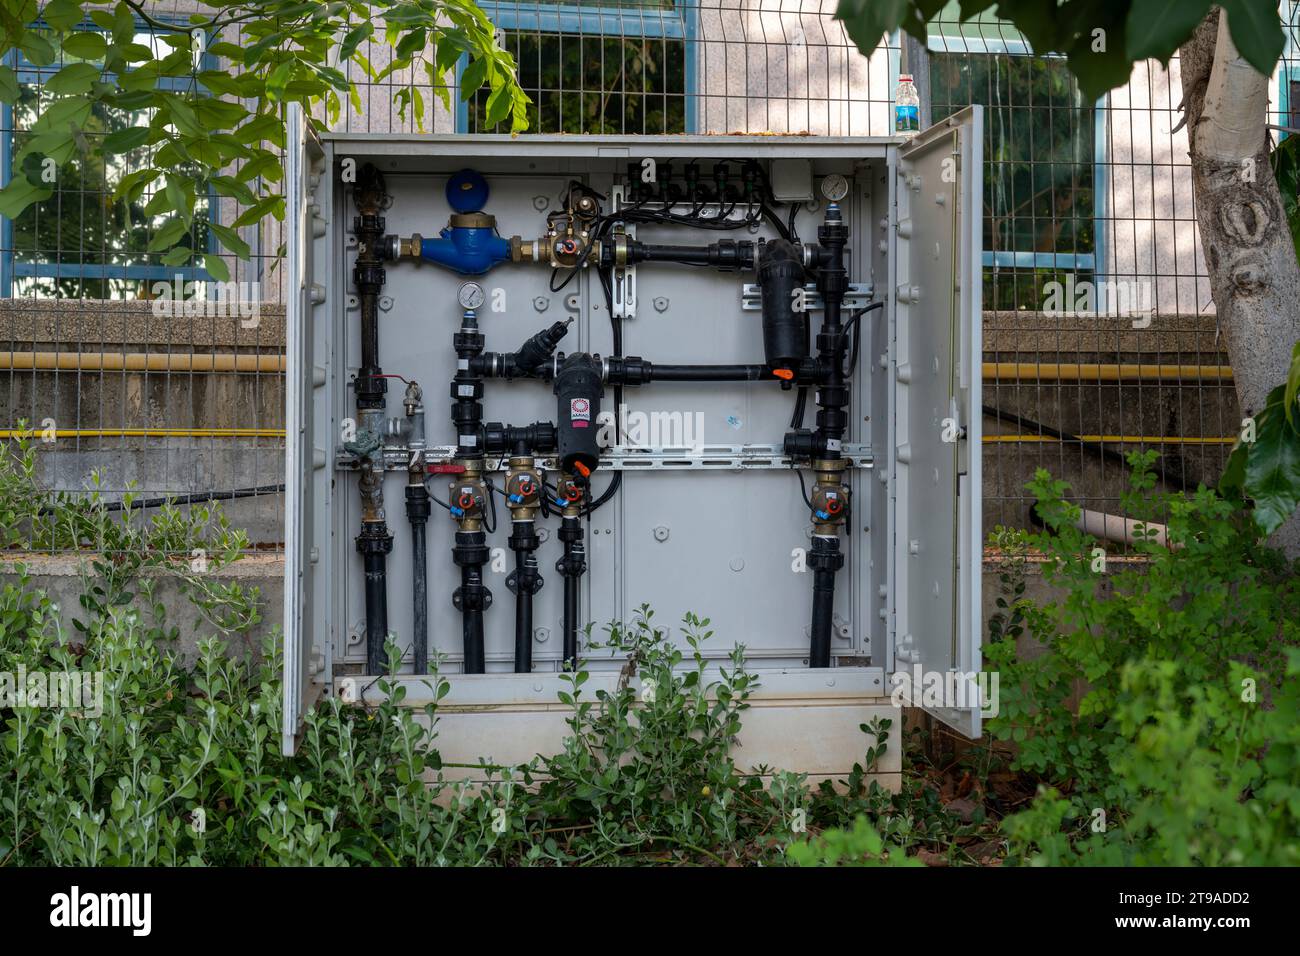 Automatic urban park and garden watering system control unit with several controls each with different programming according to specific plant require Stock Photo